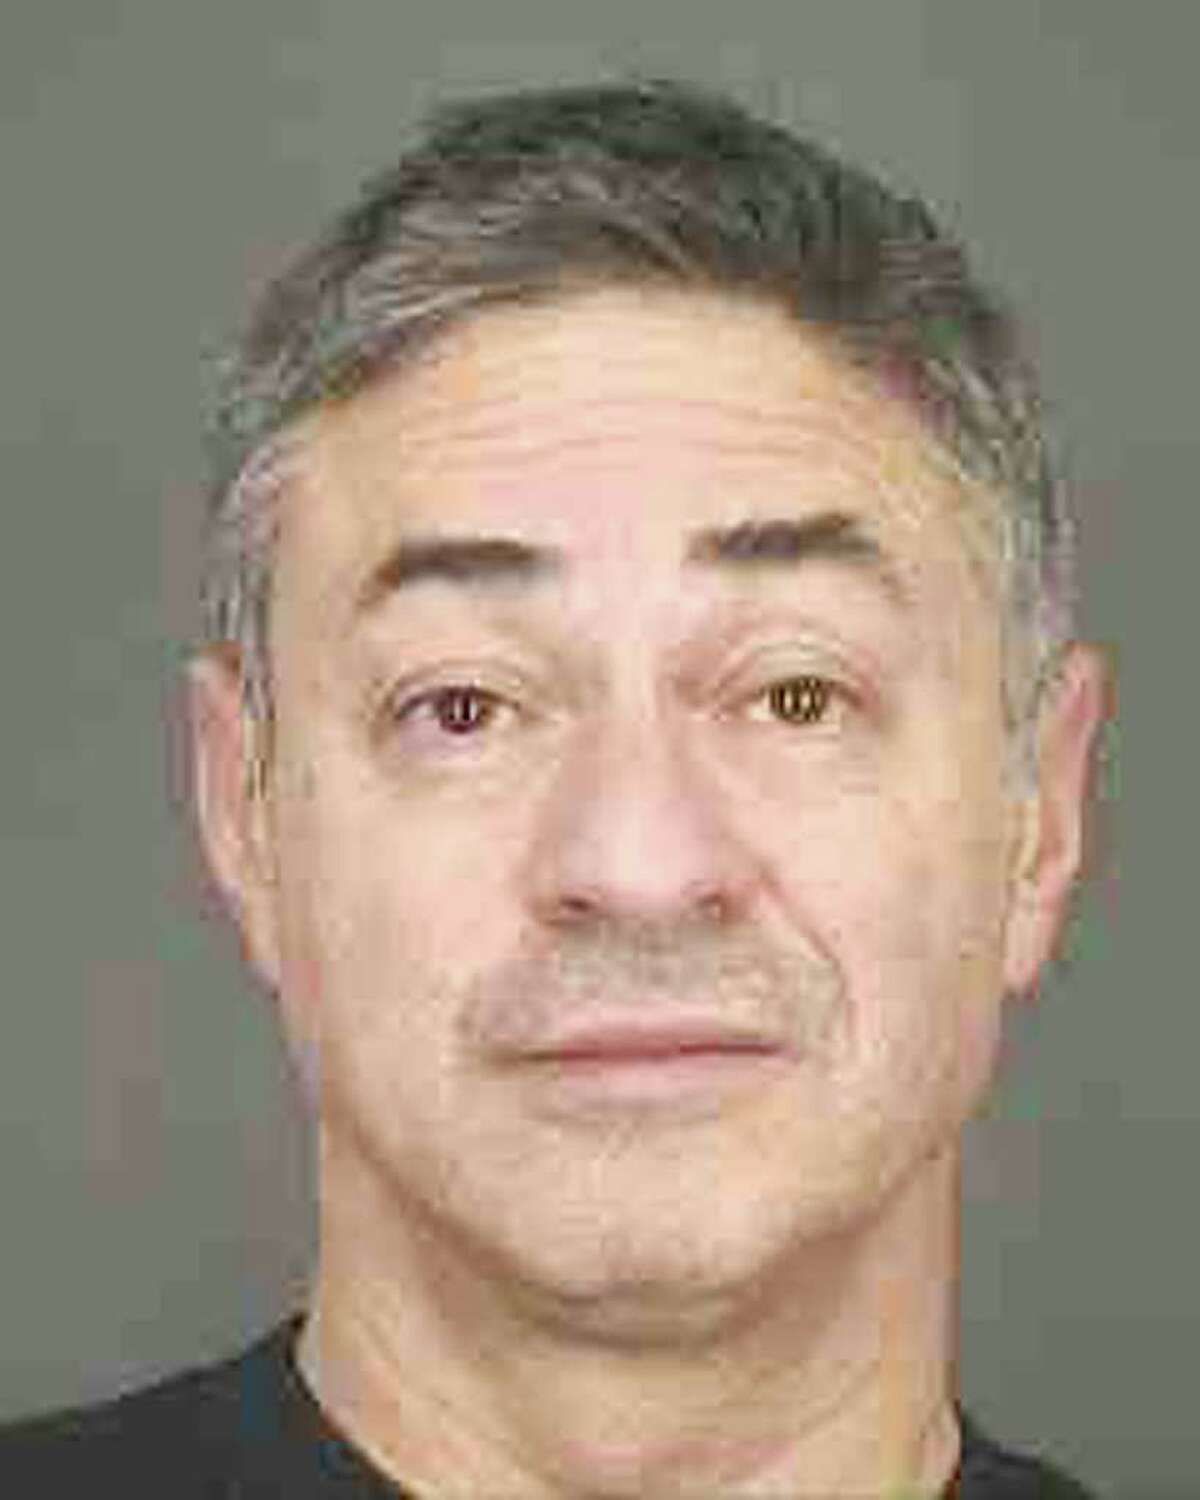 Clifford Berken, of Stamford. Photo courtesy of the Westchester District Attorney's office